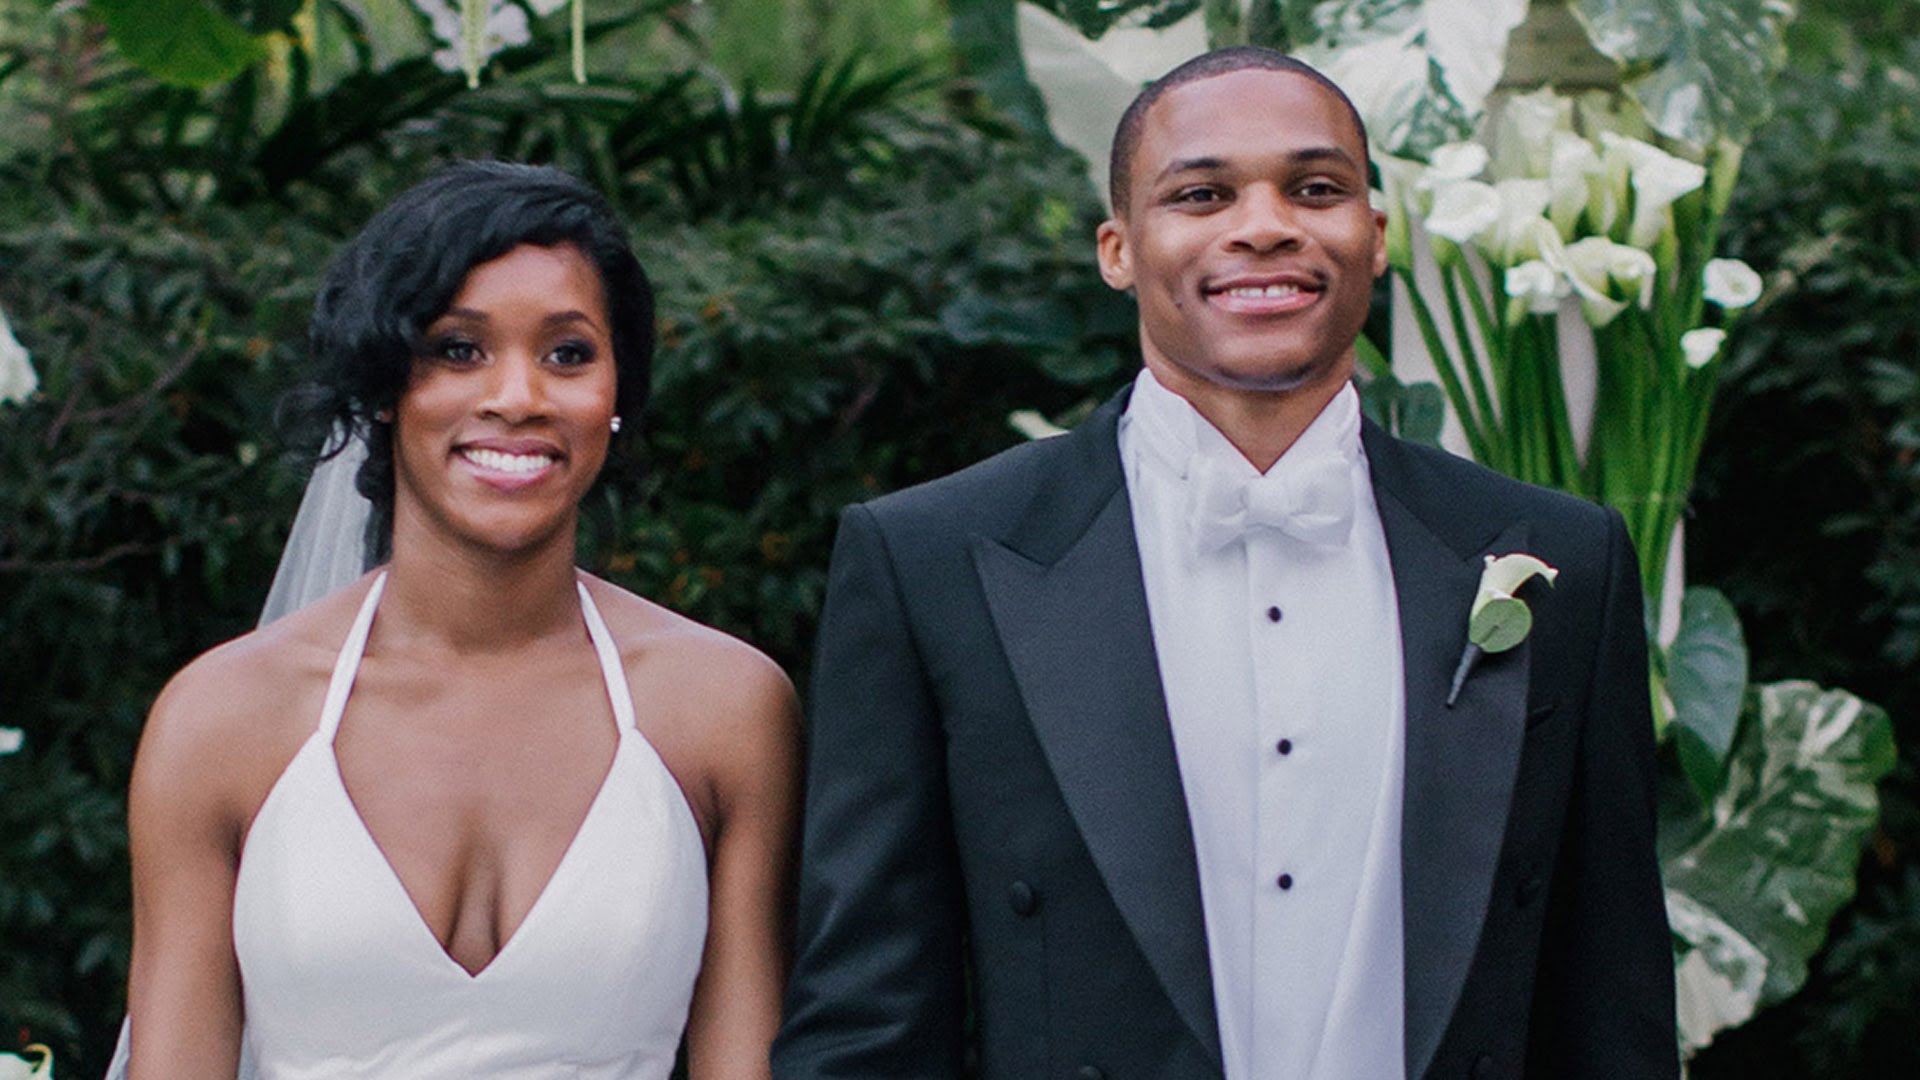 His Formal Romper is Hideous: Russell Westbrook and Wife Nina